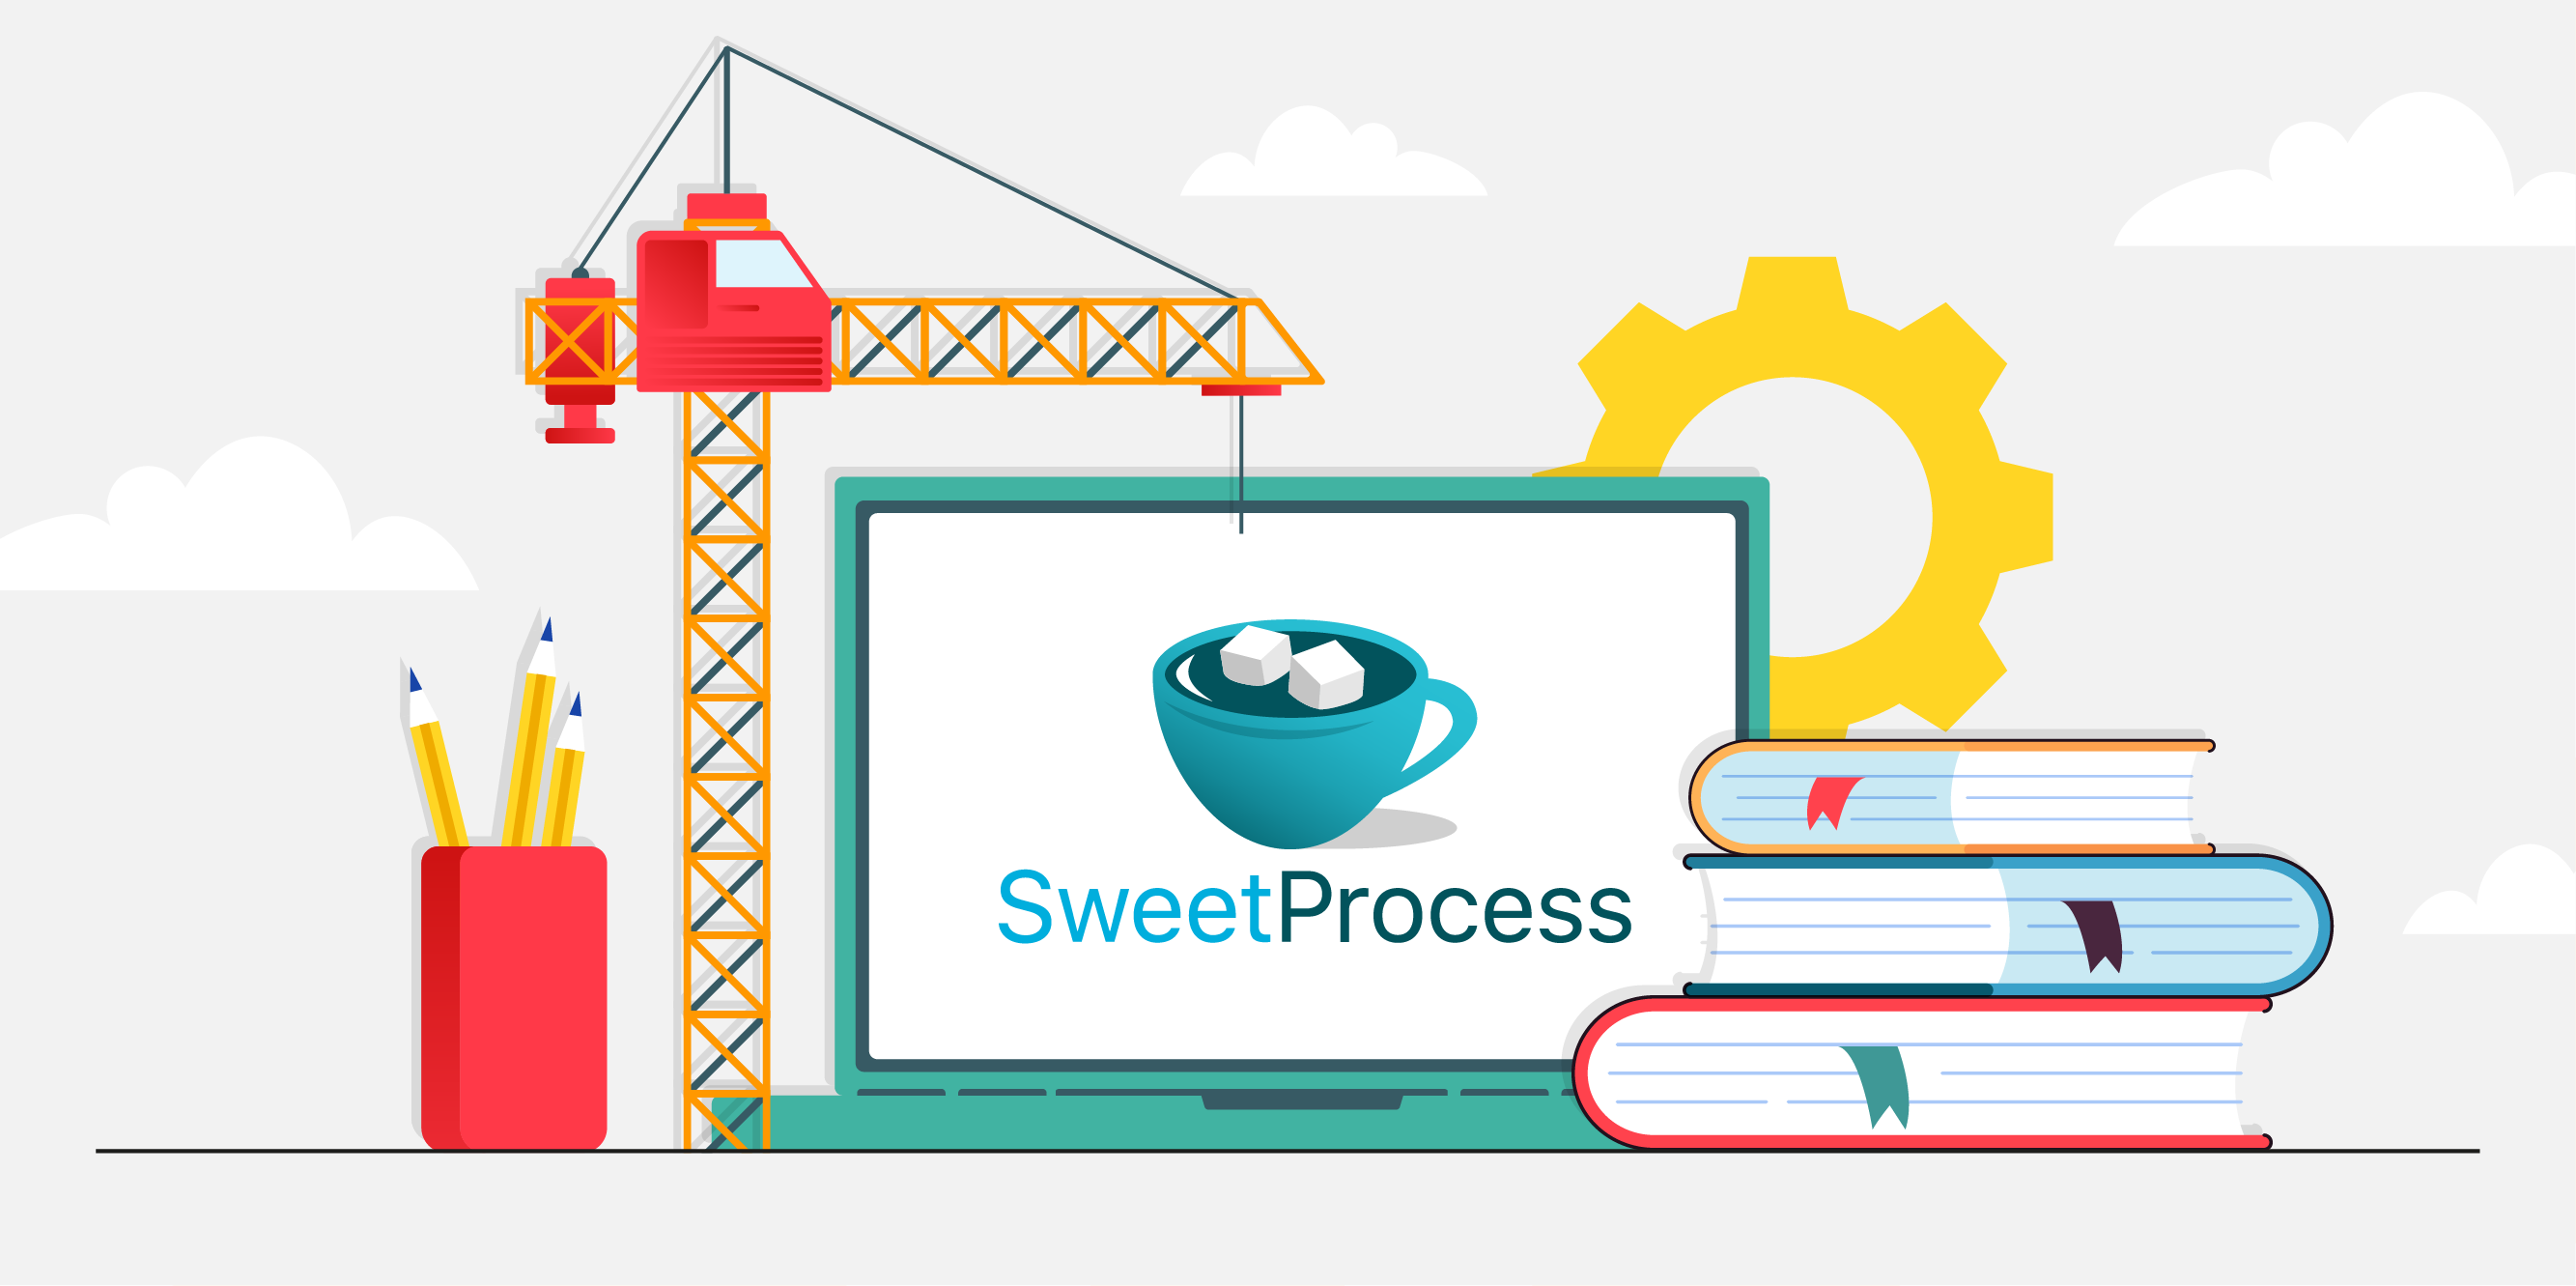 How to Build a Knowledge Management System in SweetProcess